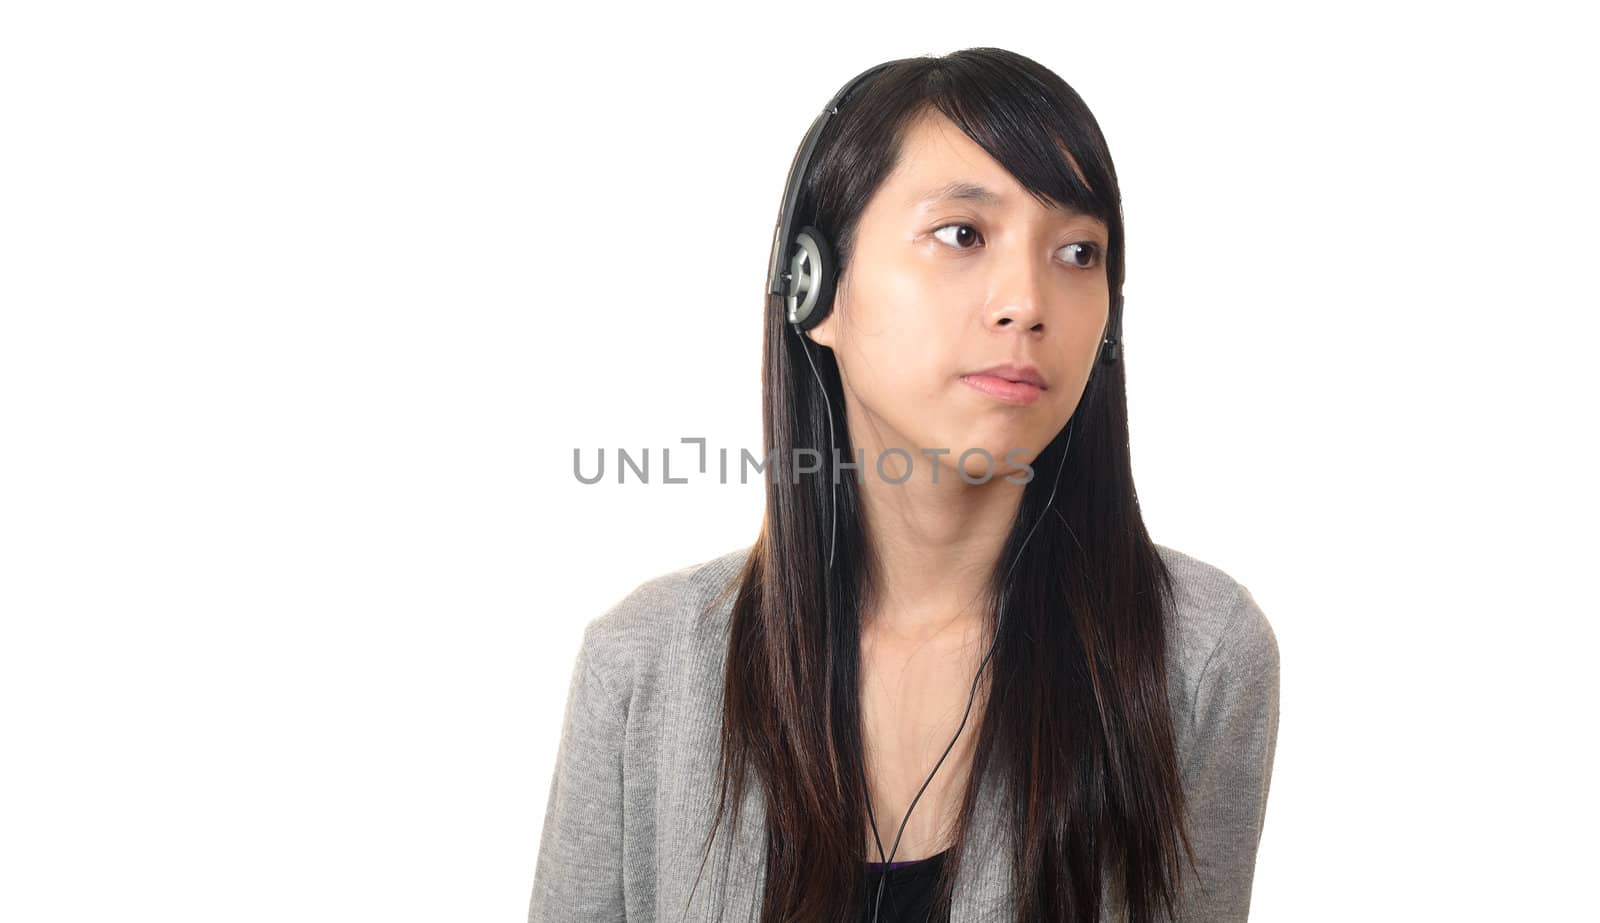 girl listen to music with headphones, chinese